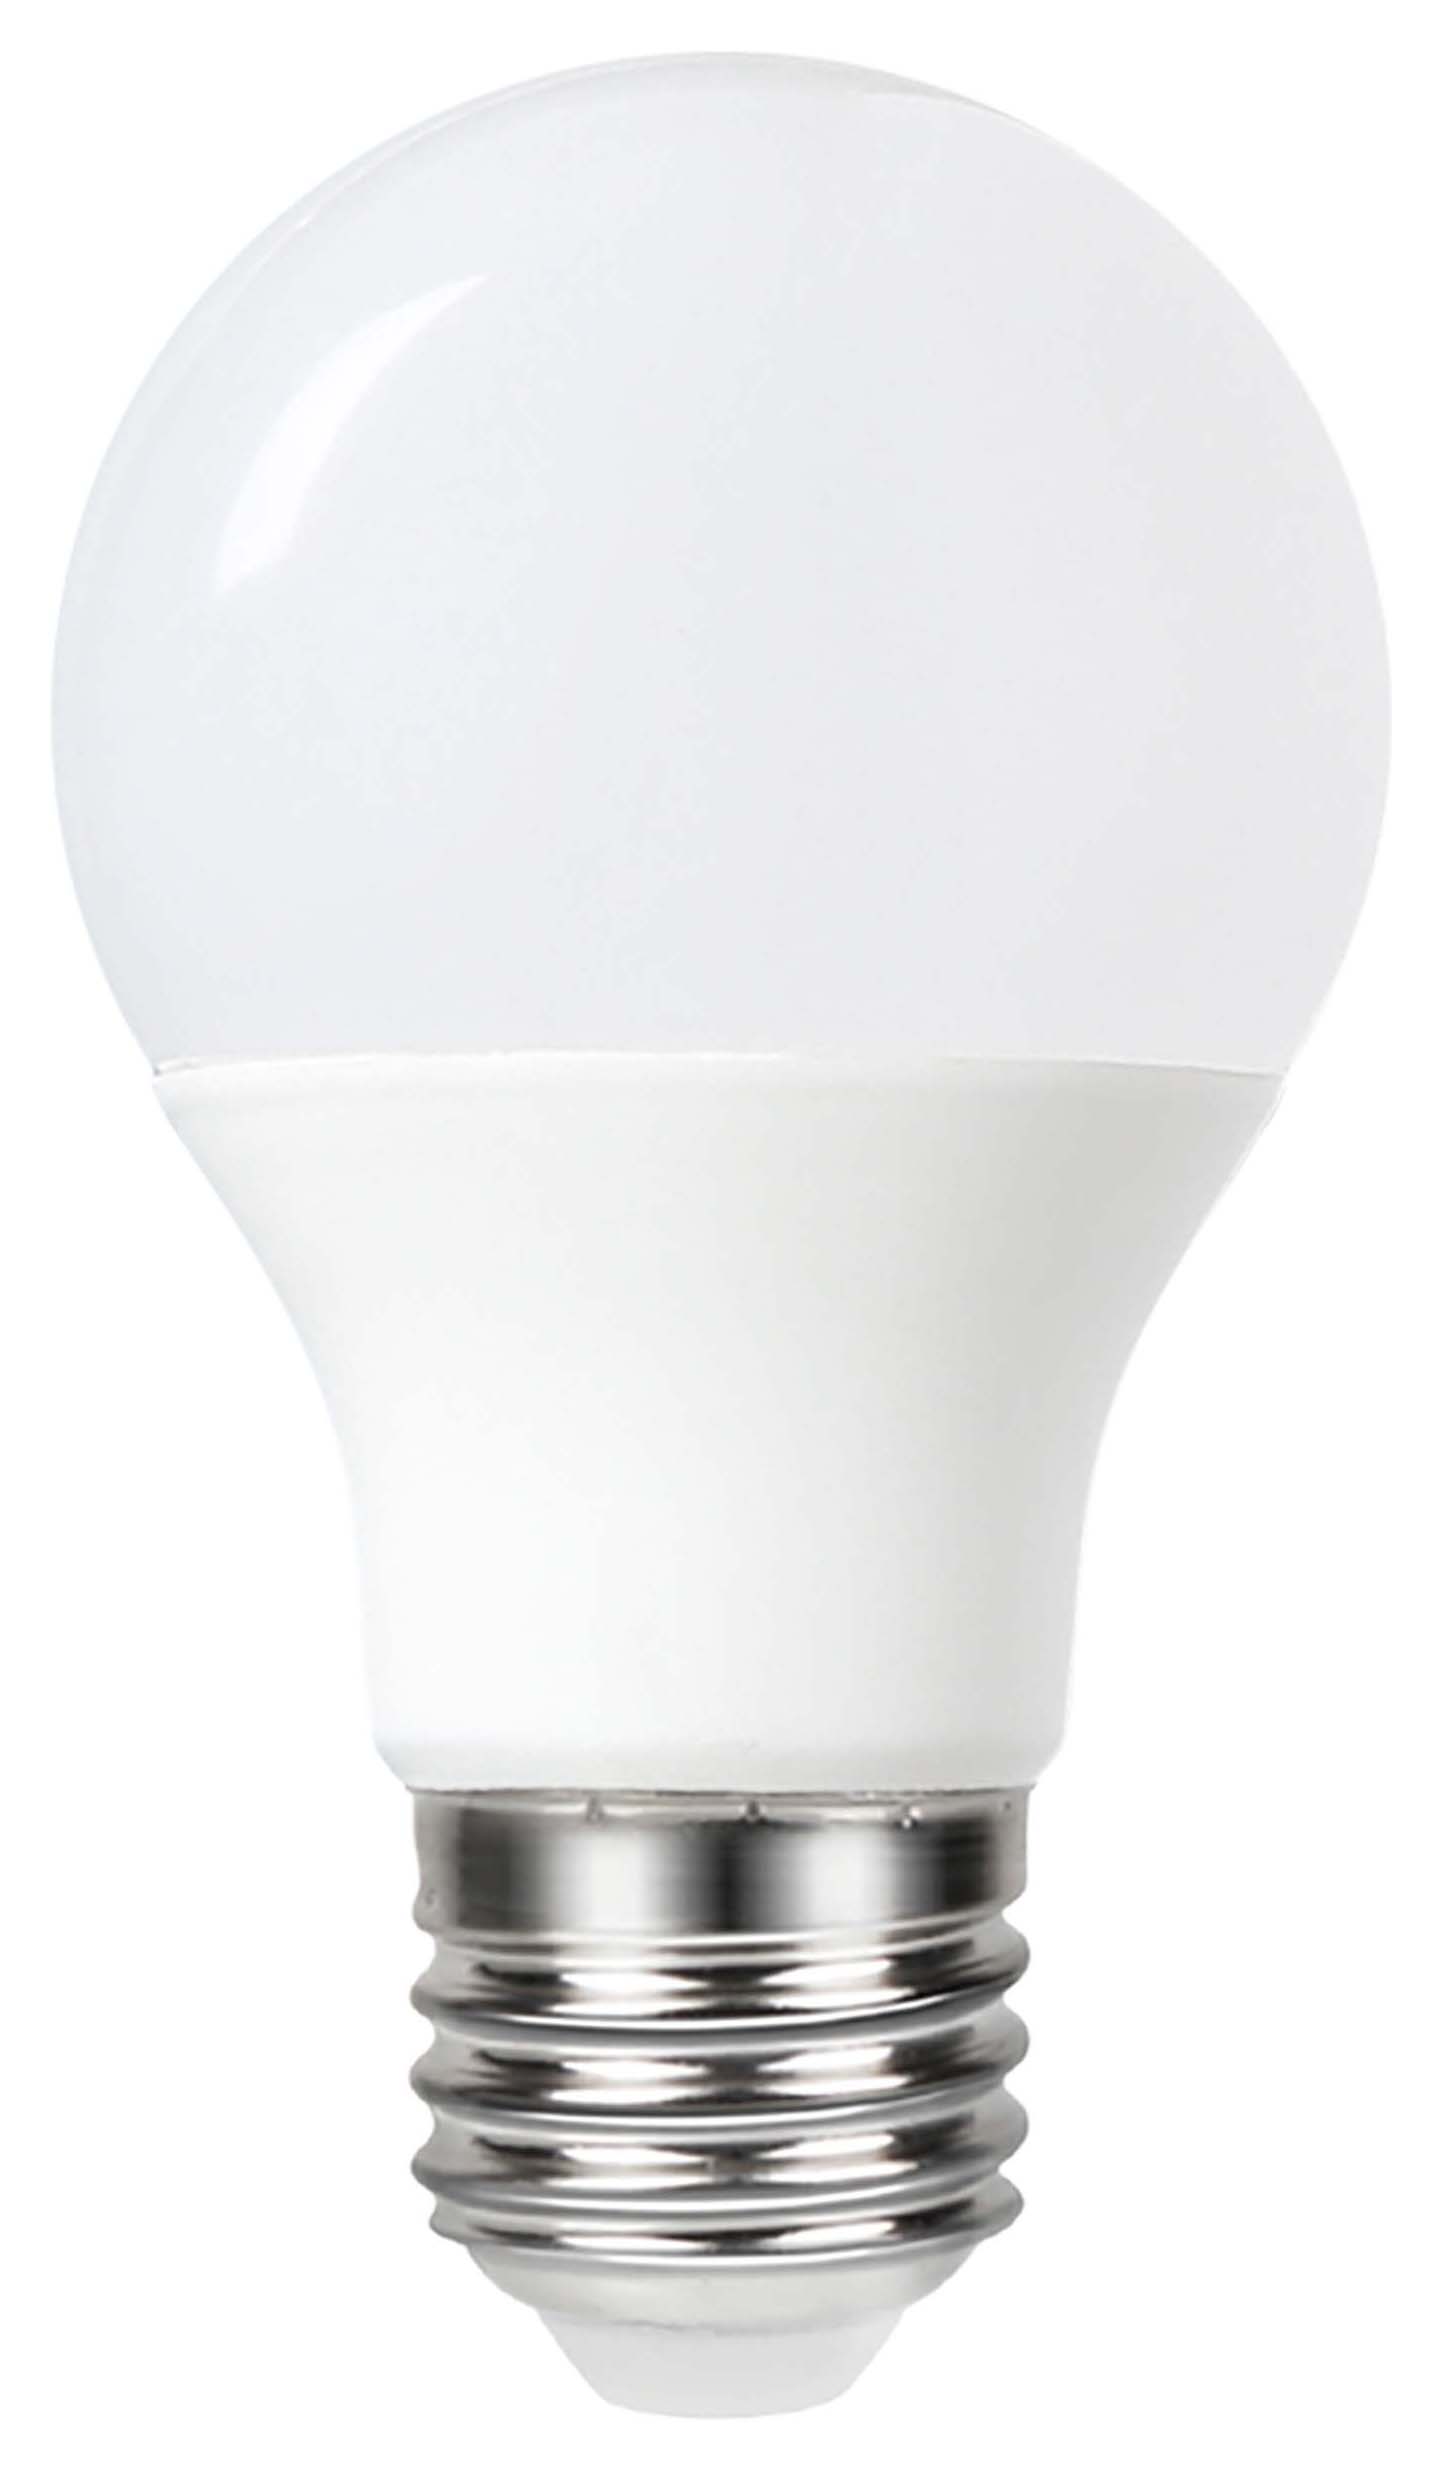 Wickes Non-Dimmable GLS Opal LED E27 8.8W Cool White Light Bulb